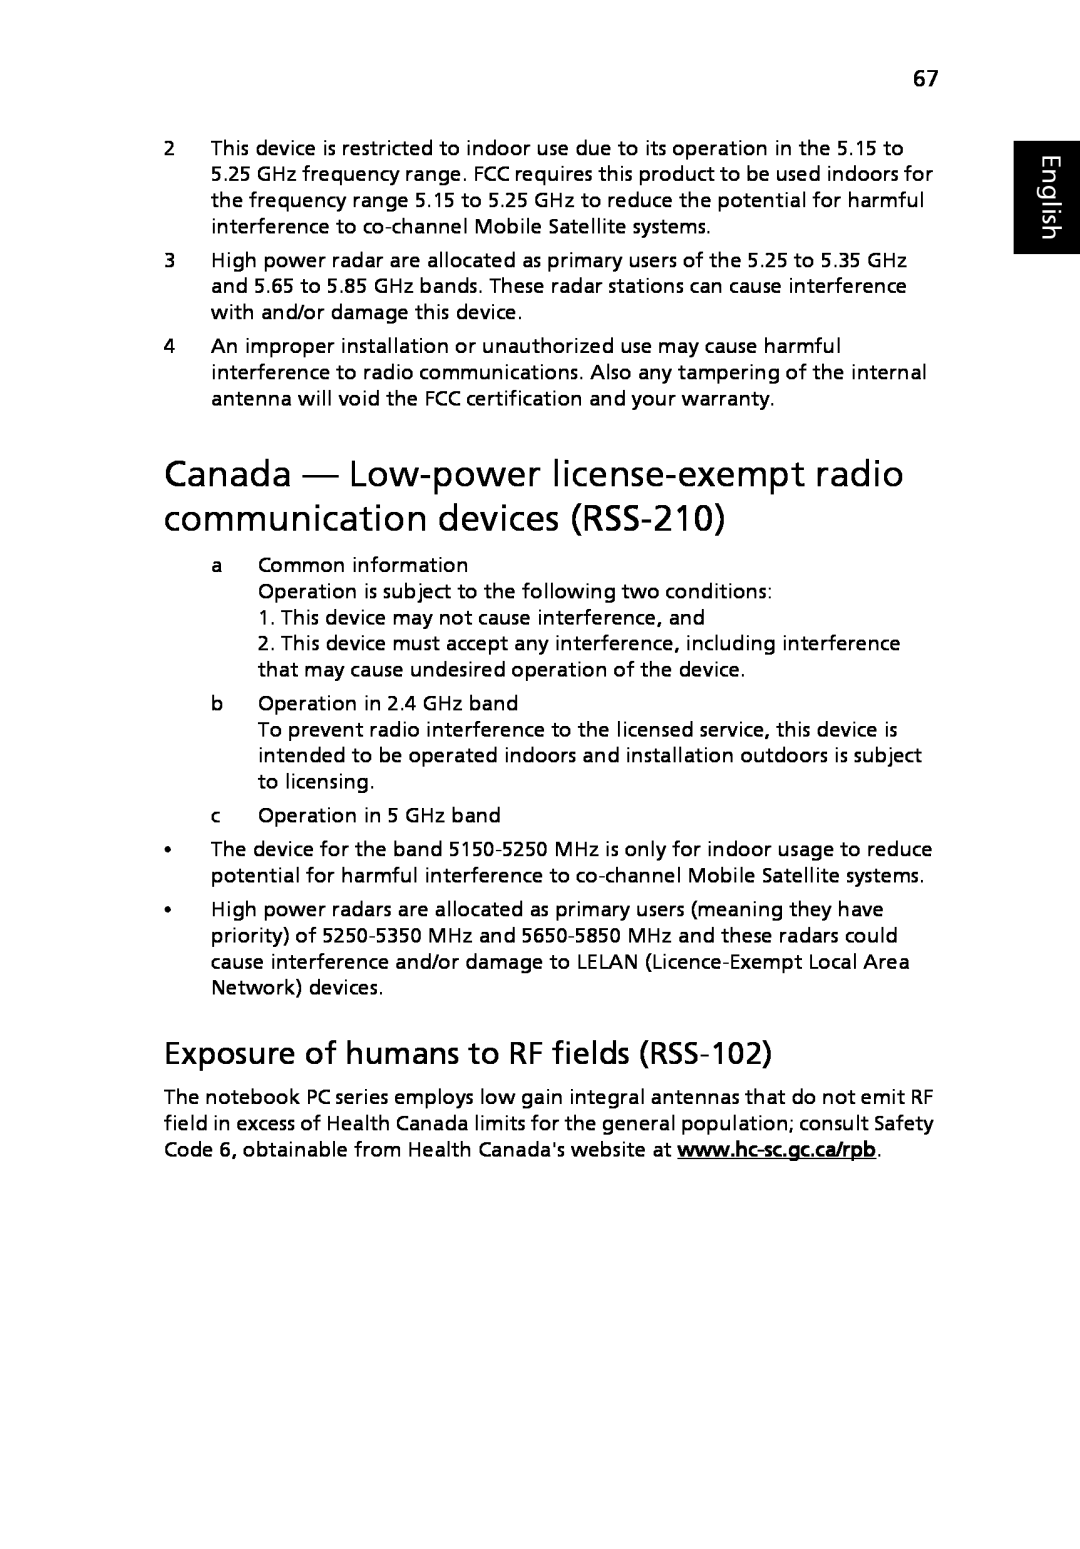 Acer 3630 Canada - Low-power license-exempt radio communication devices RSS-210, Exposure of humans to RF fields RSS-102 